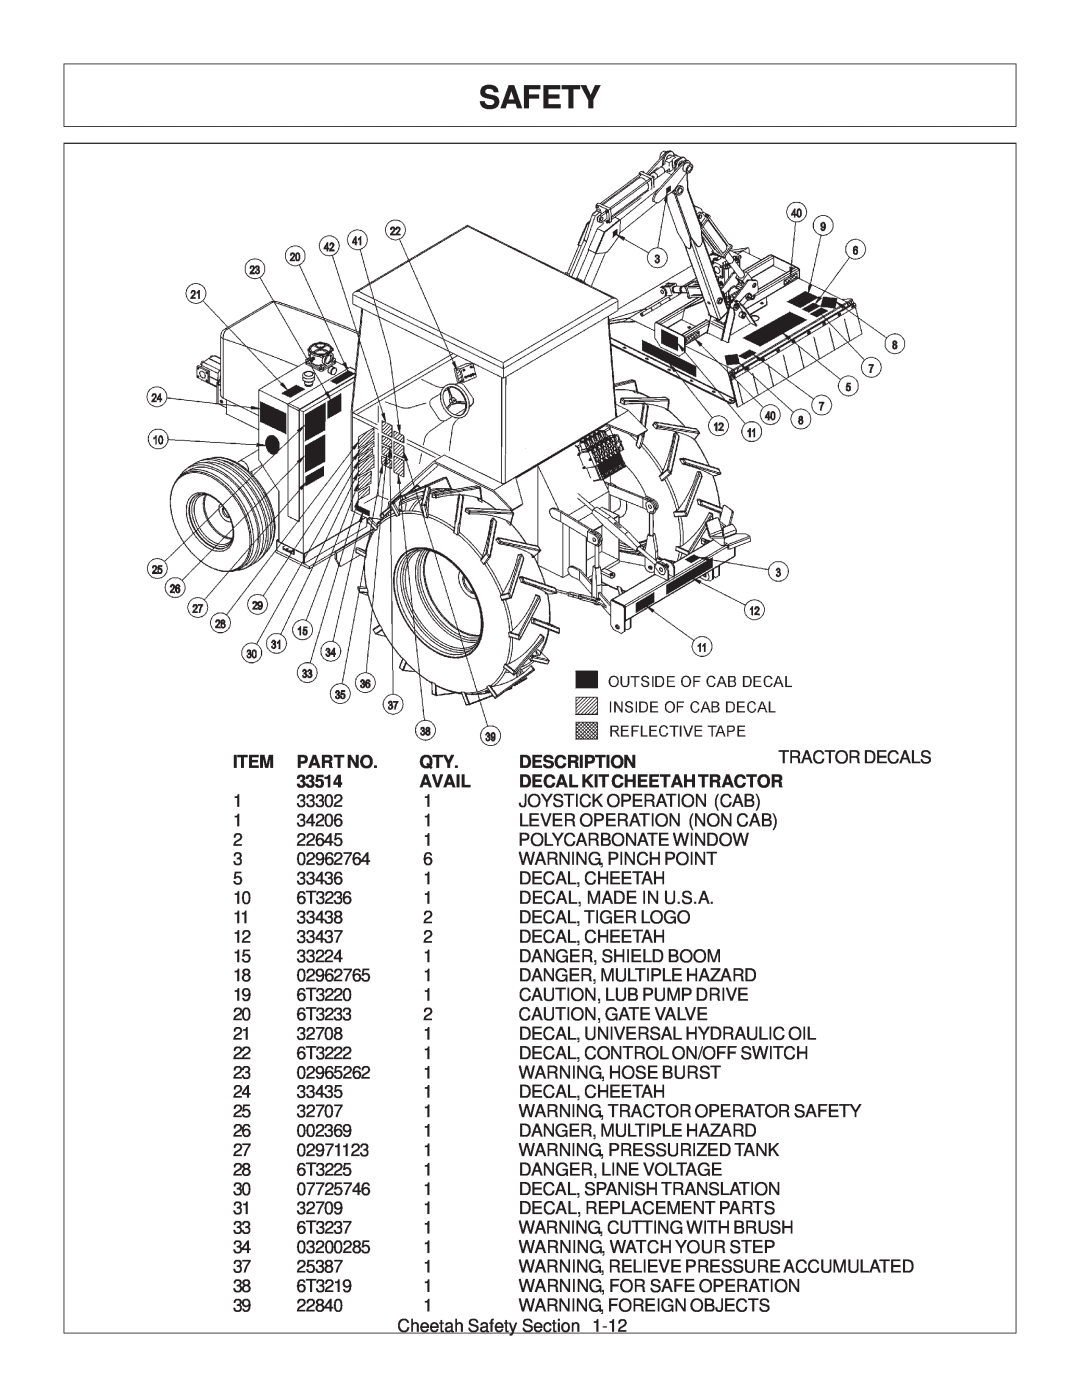 Tiger Products Co., Ltd JD 5101E, JD 5083E, JD 5093E manual Safety, Description, 33514, Avail, Decal Kit Cheetah Tractor 